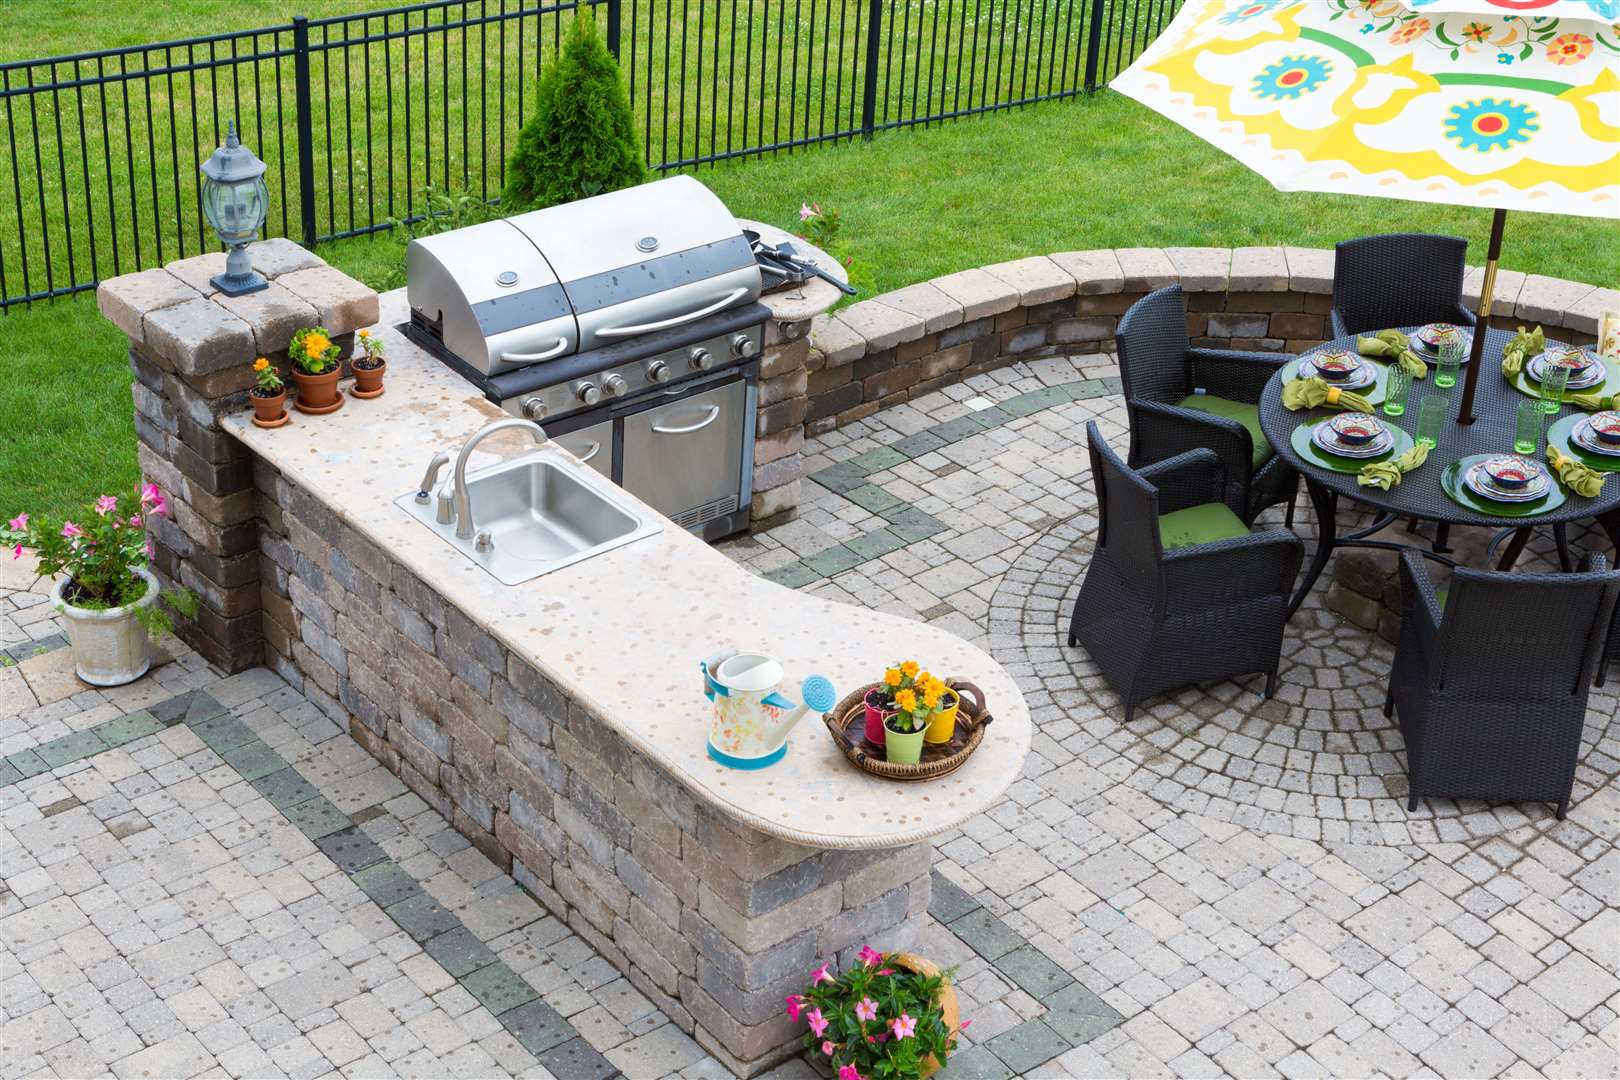 Make an outdoor kitchen for some grown-up fun.